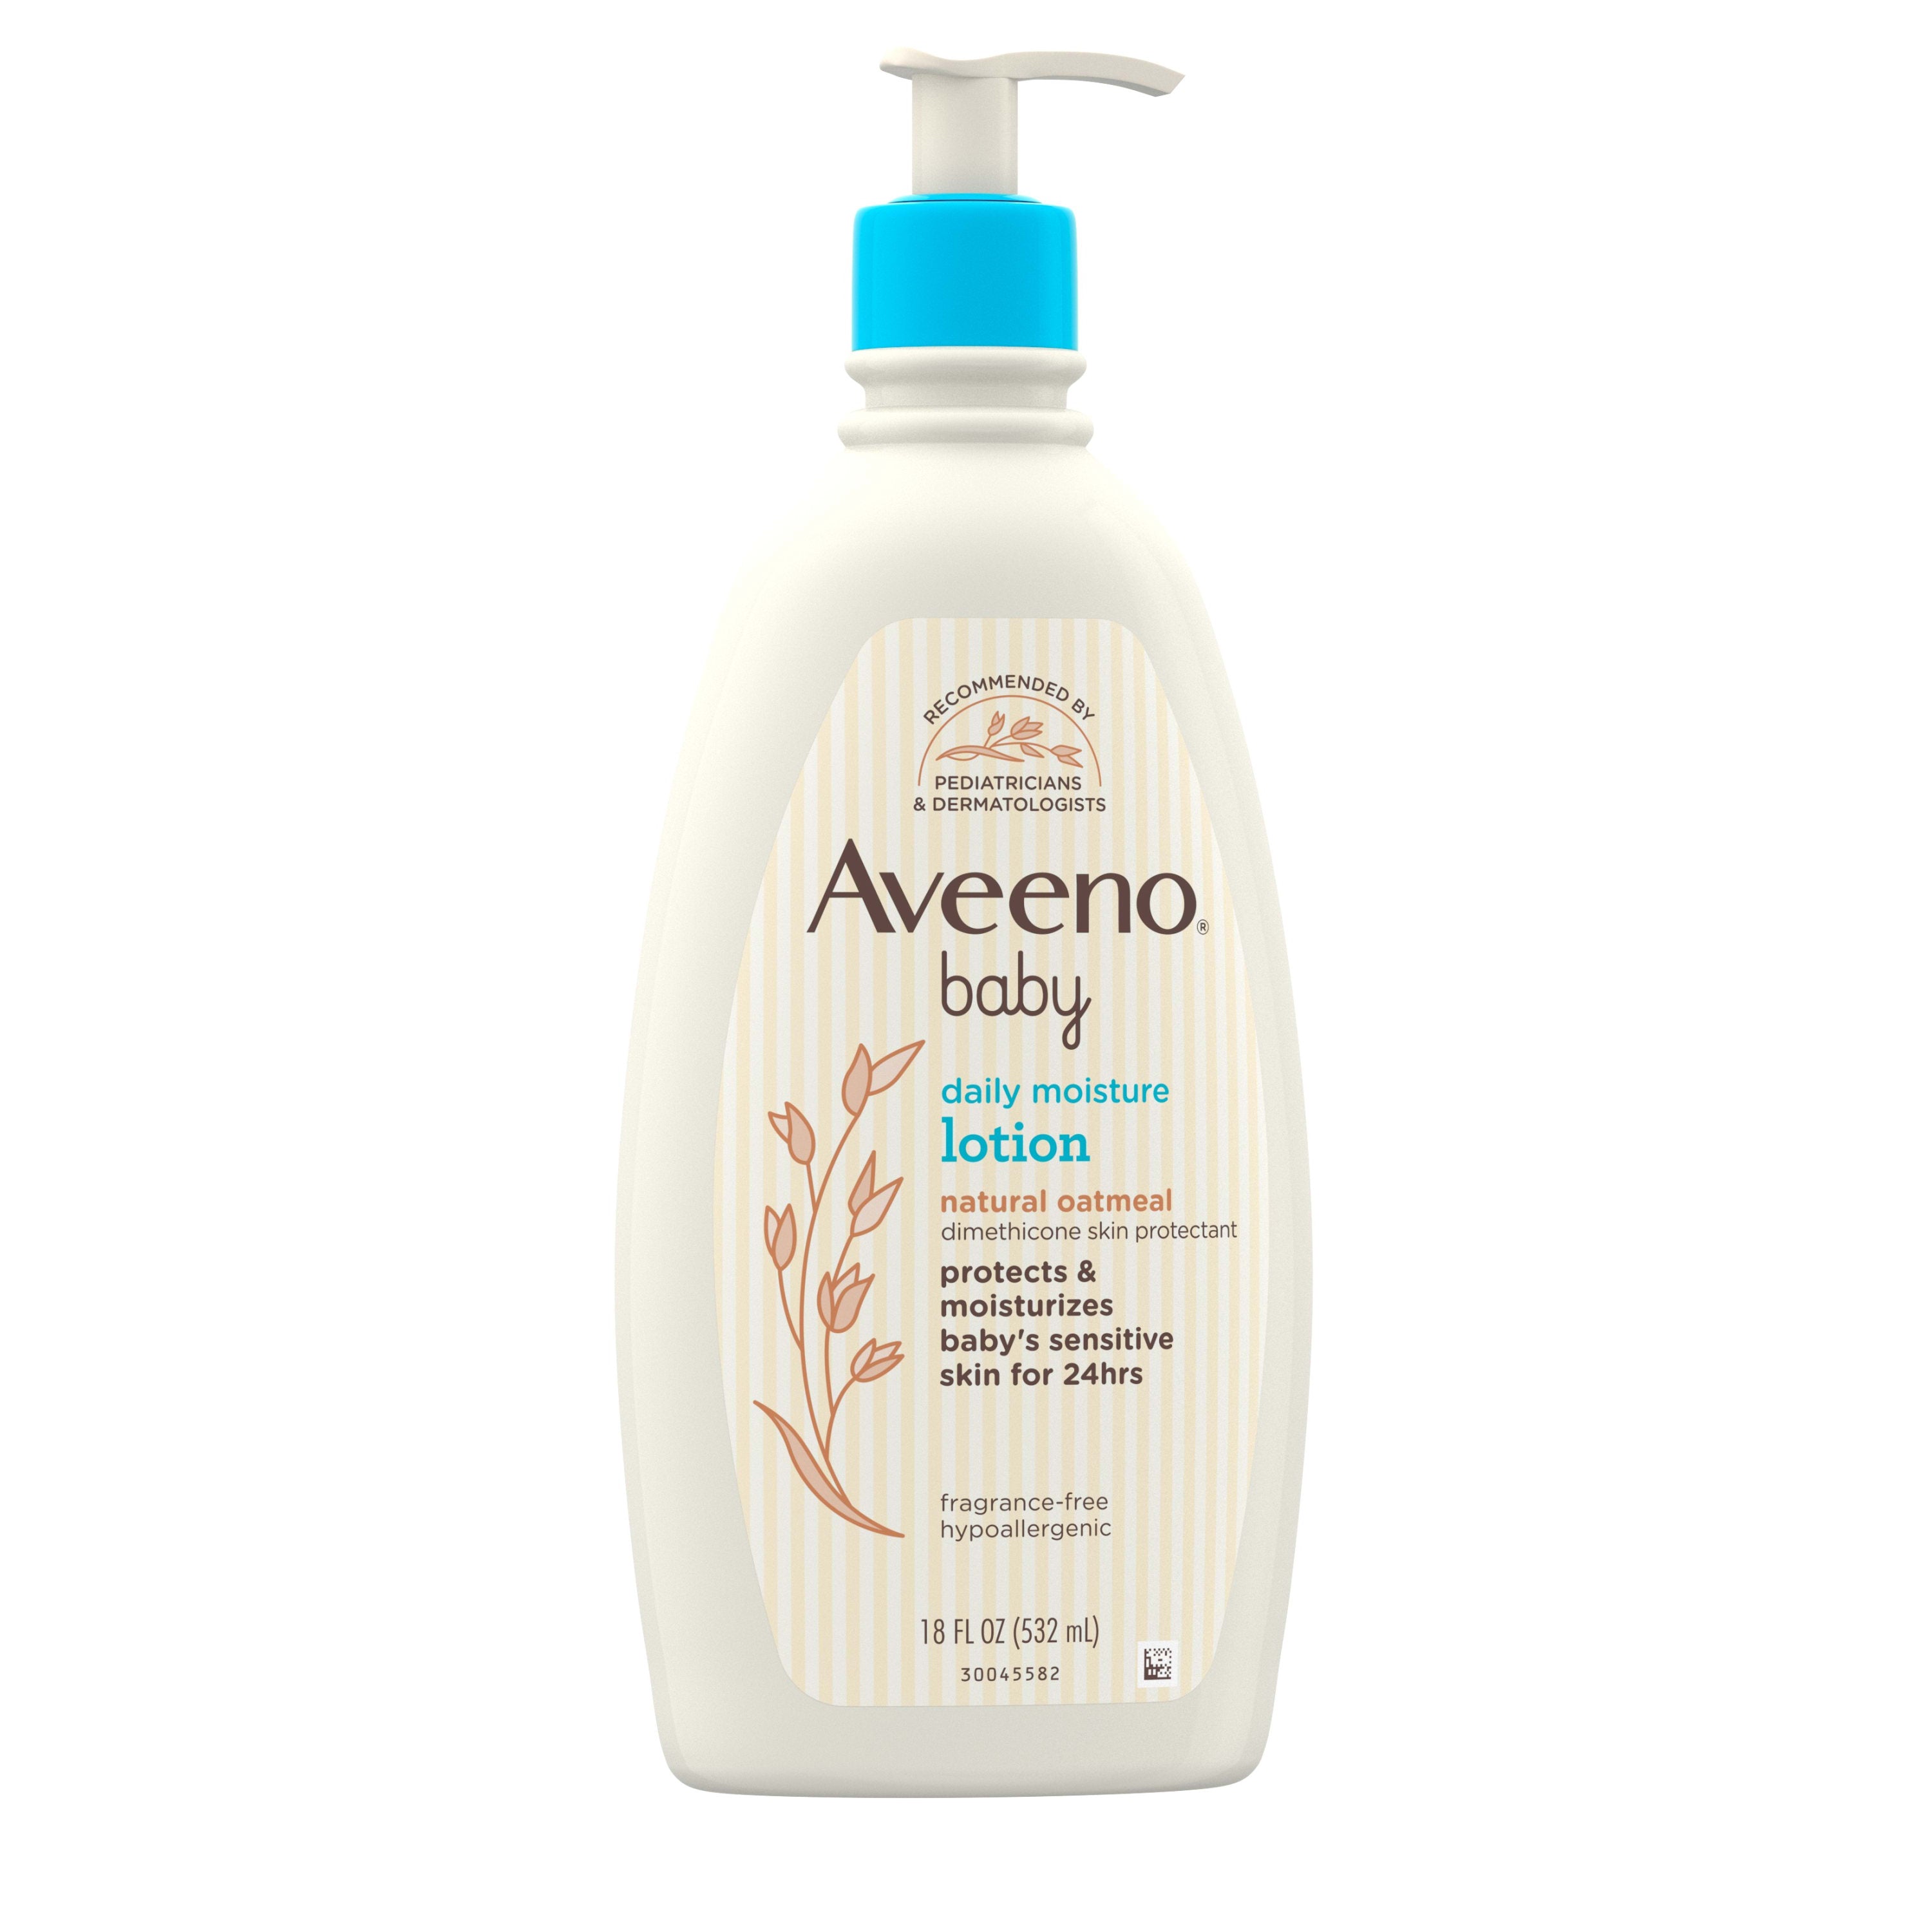 Aveeno Baby Daily Moisture Lotion with Natural Oatmeal 532 ml